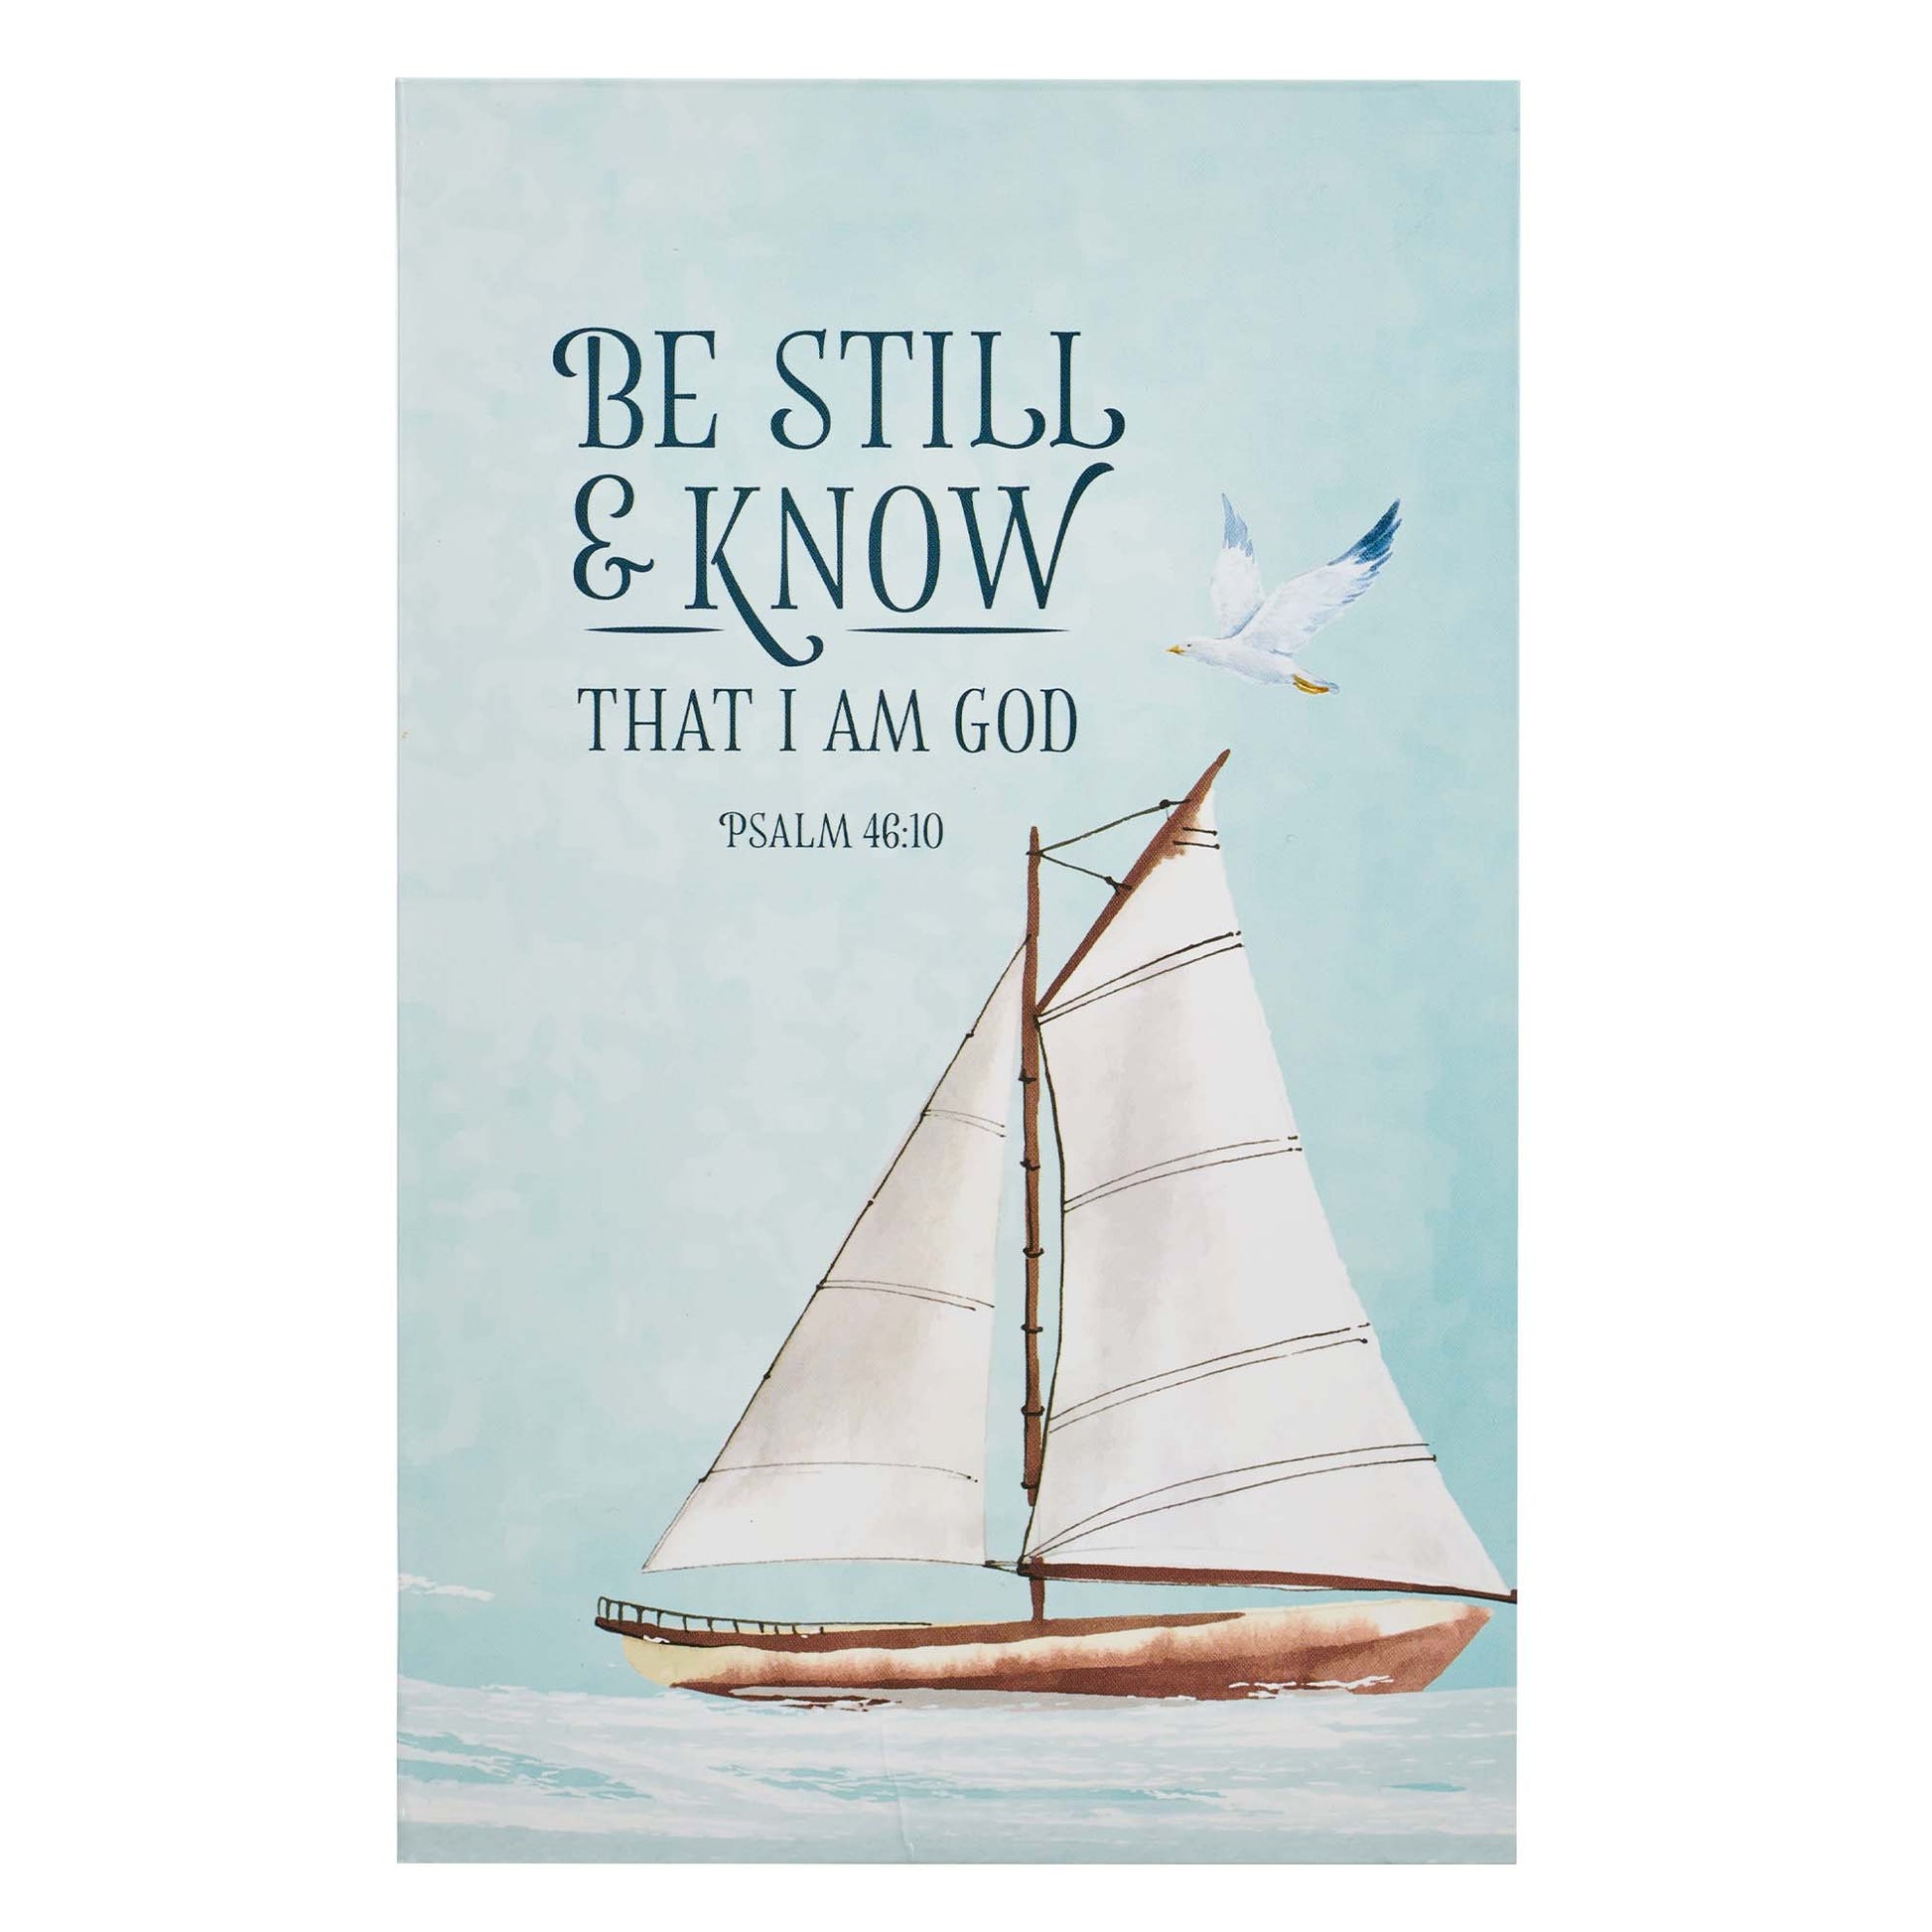 Be Still & Know Flexcover Journal - Psalm 46:10 - The Christian Gift Company